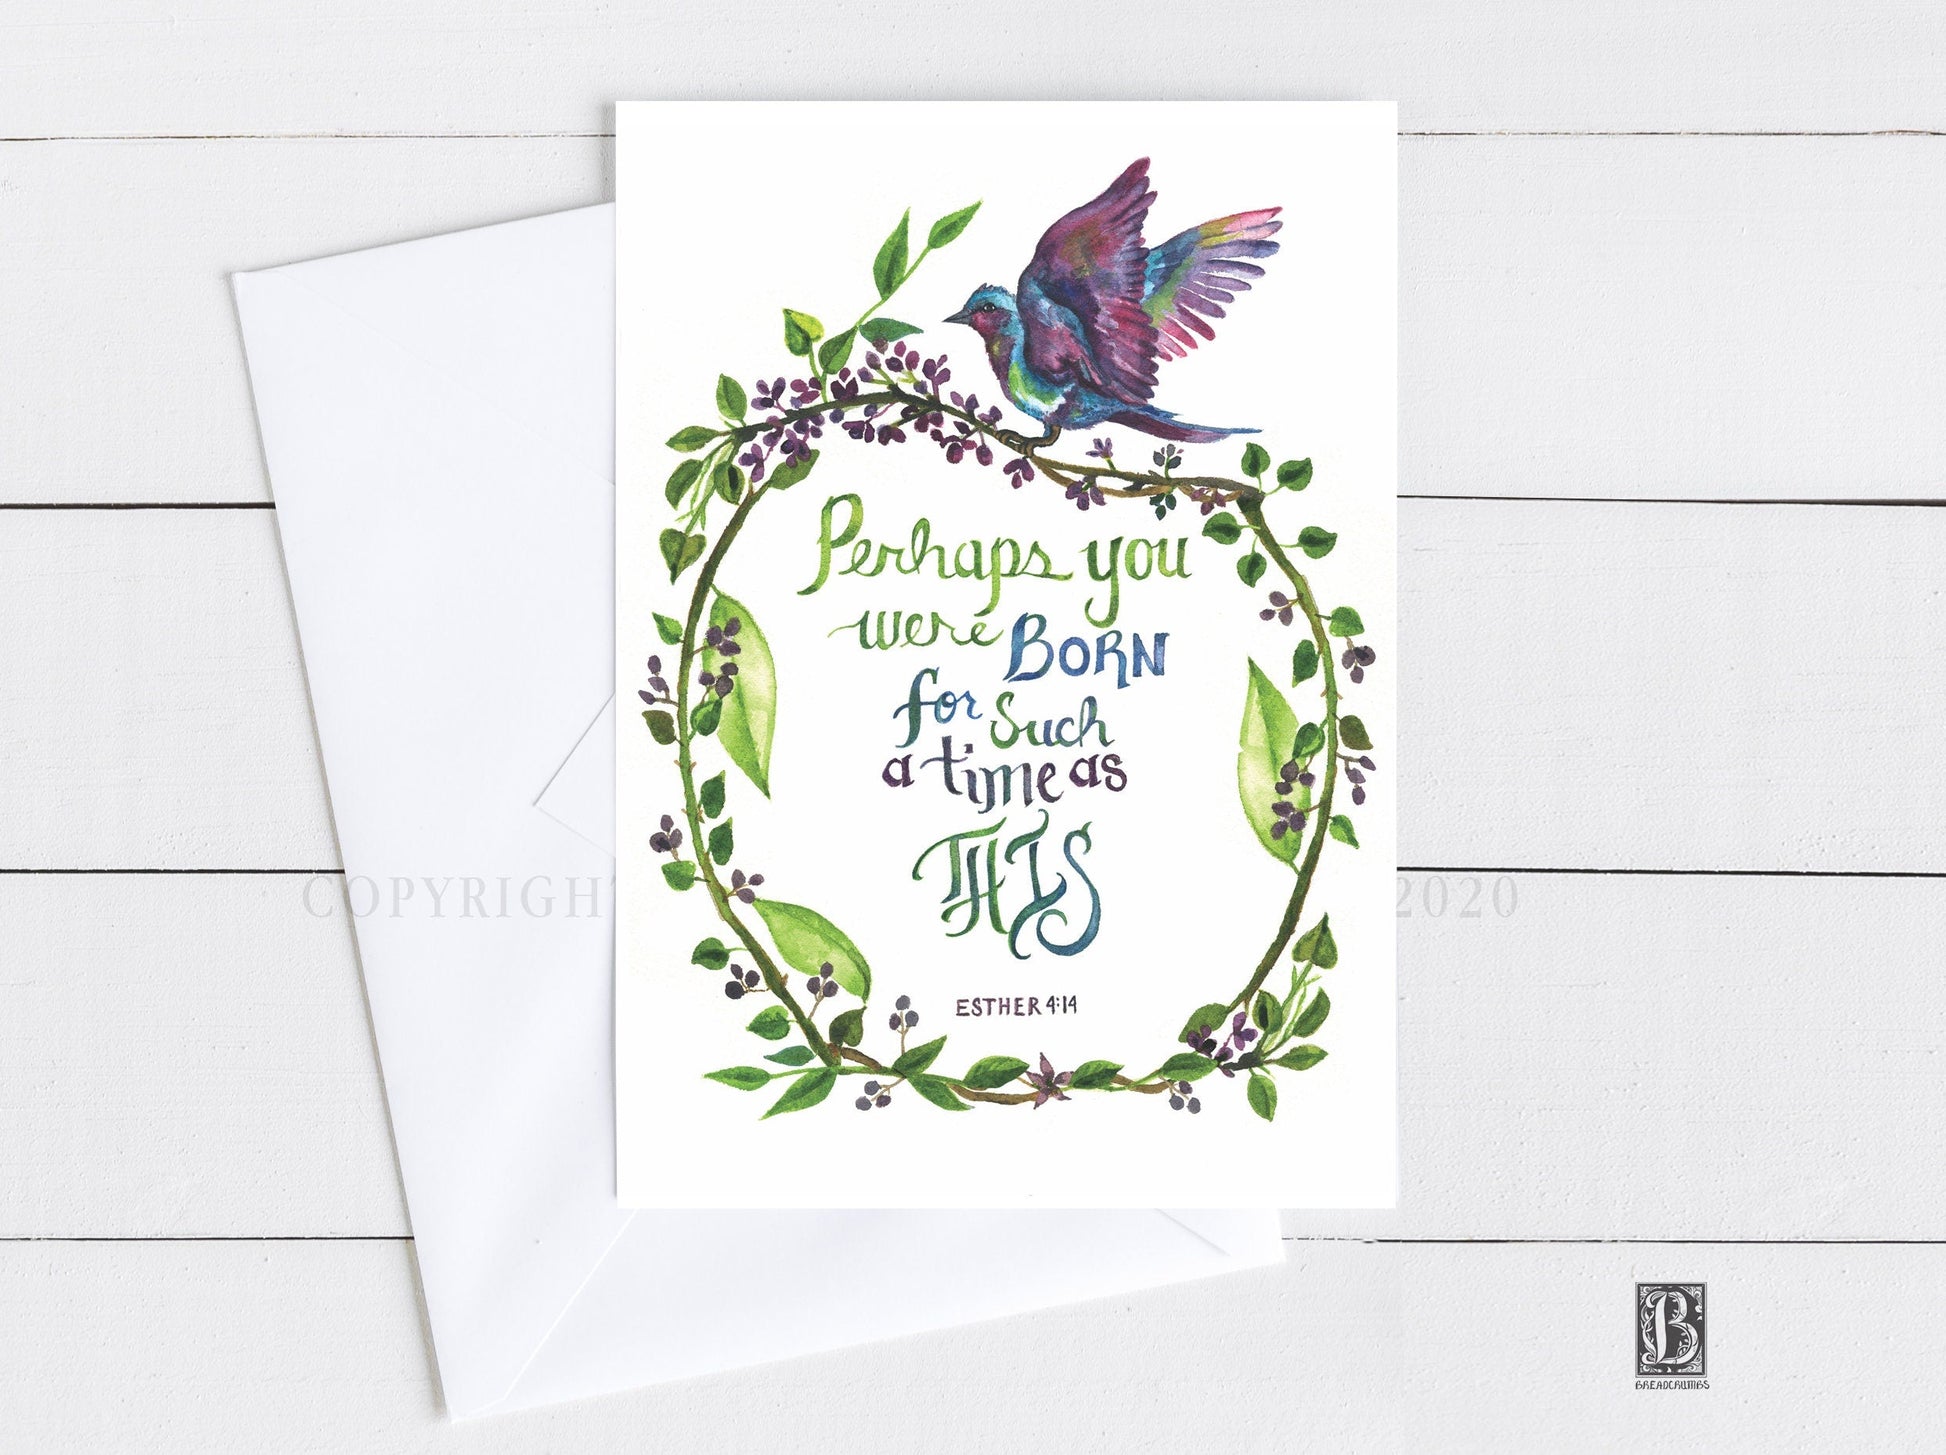 "For Such a Time as This" Esther 4:14 Card-Greeting & Note Cards-Breadcrumbs Paper Co